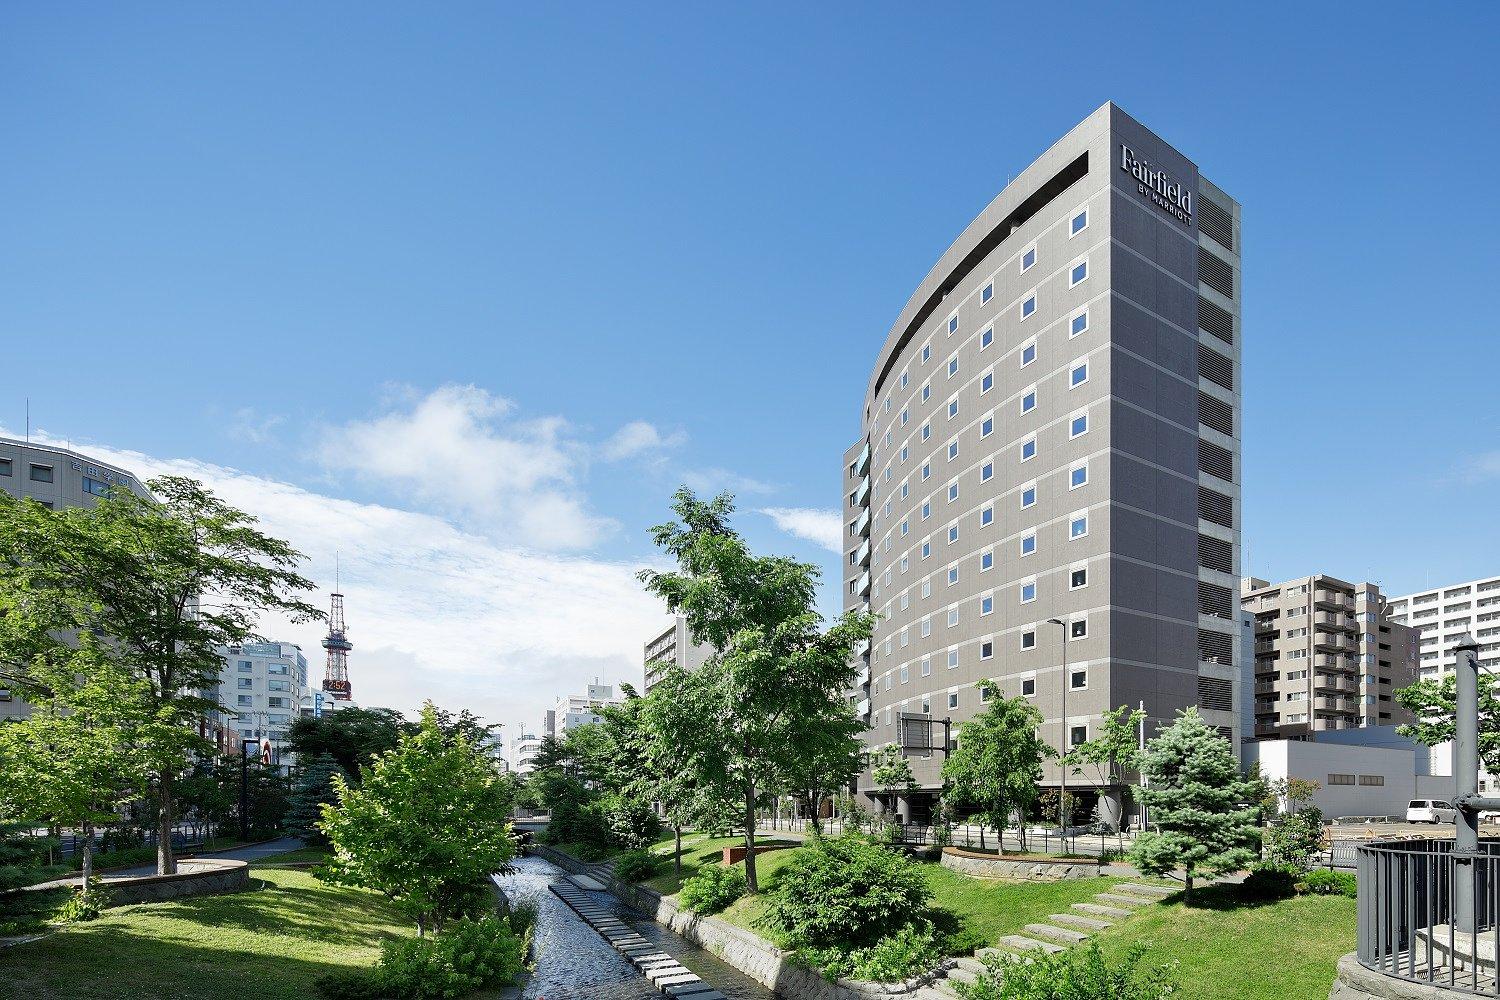 Fairfield by Marriott Sapporo＊Special offer available until 1/31 stay!